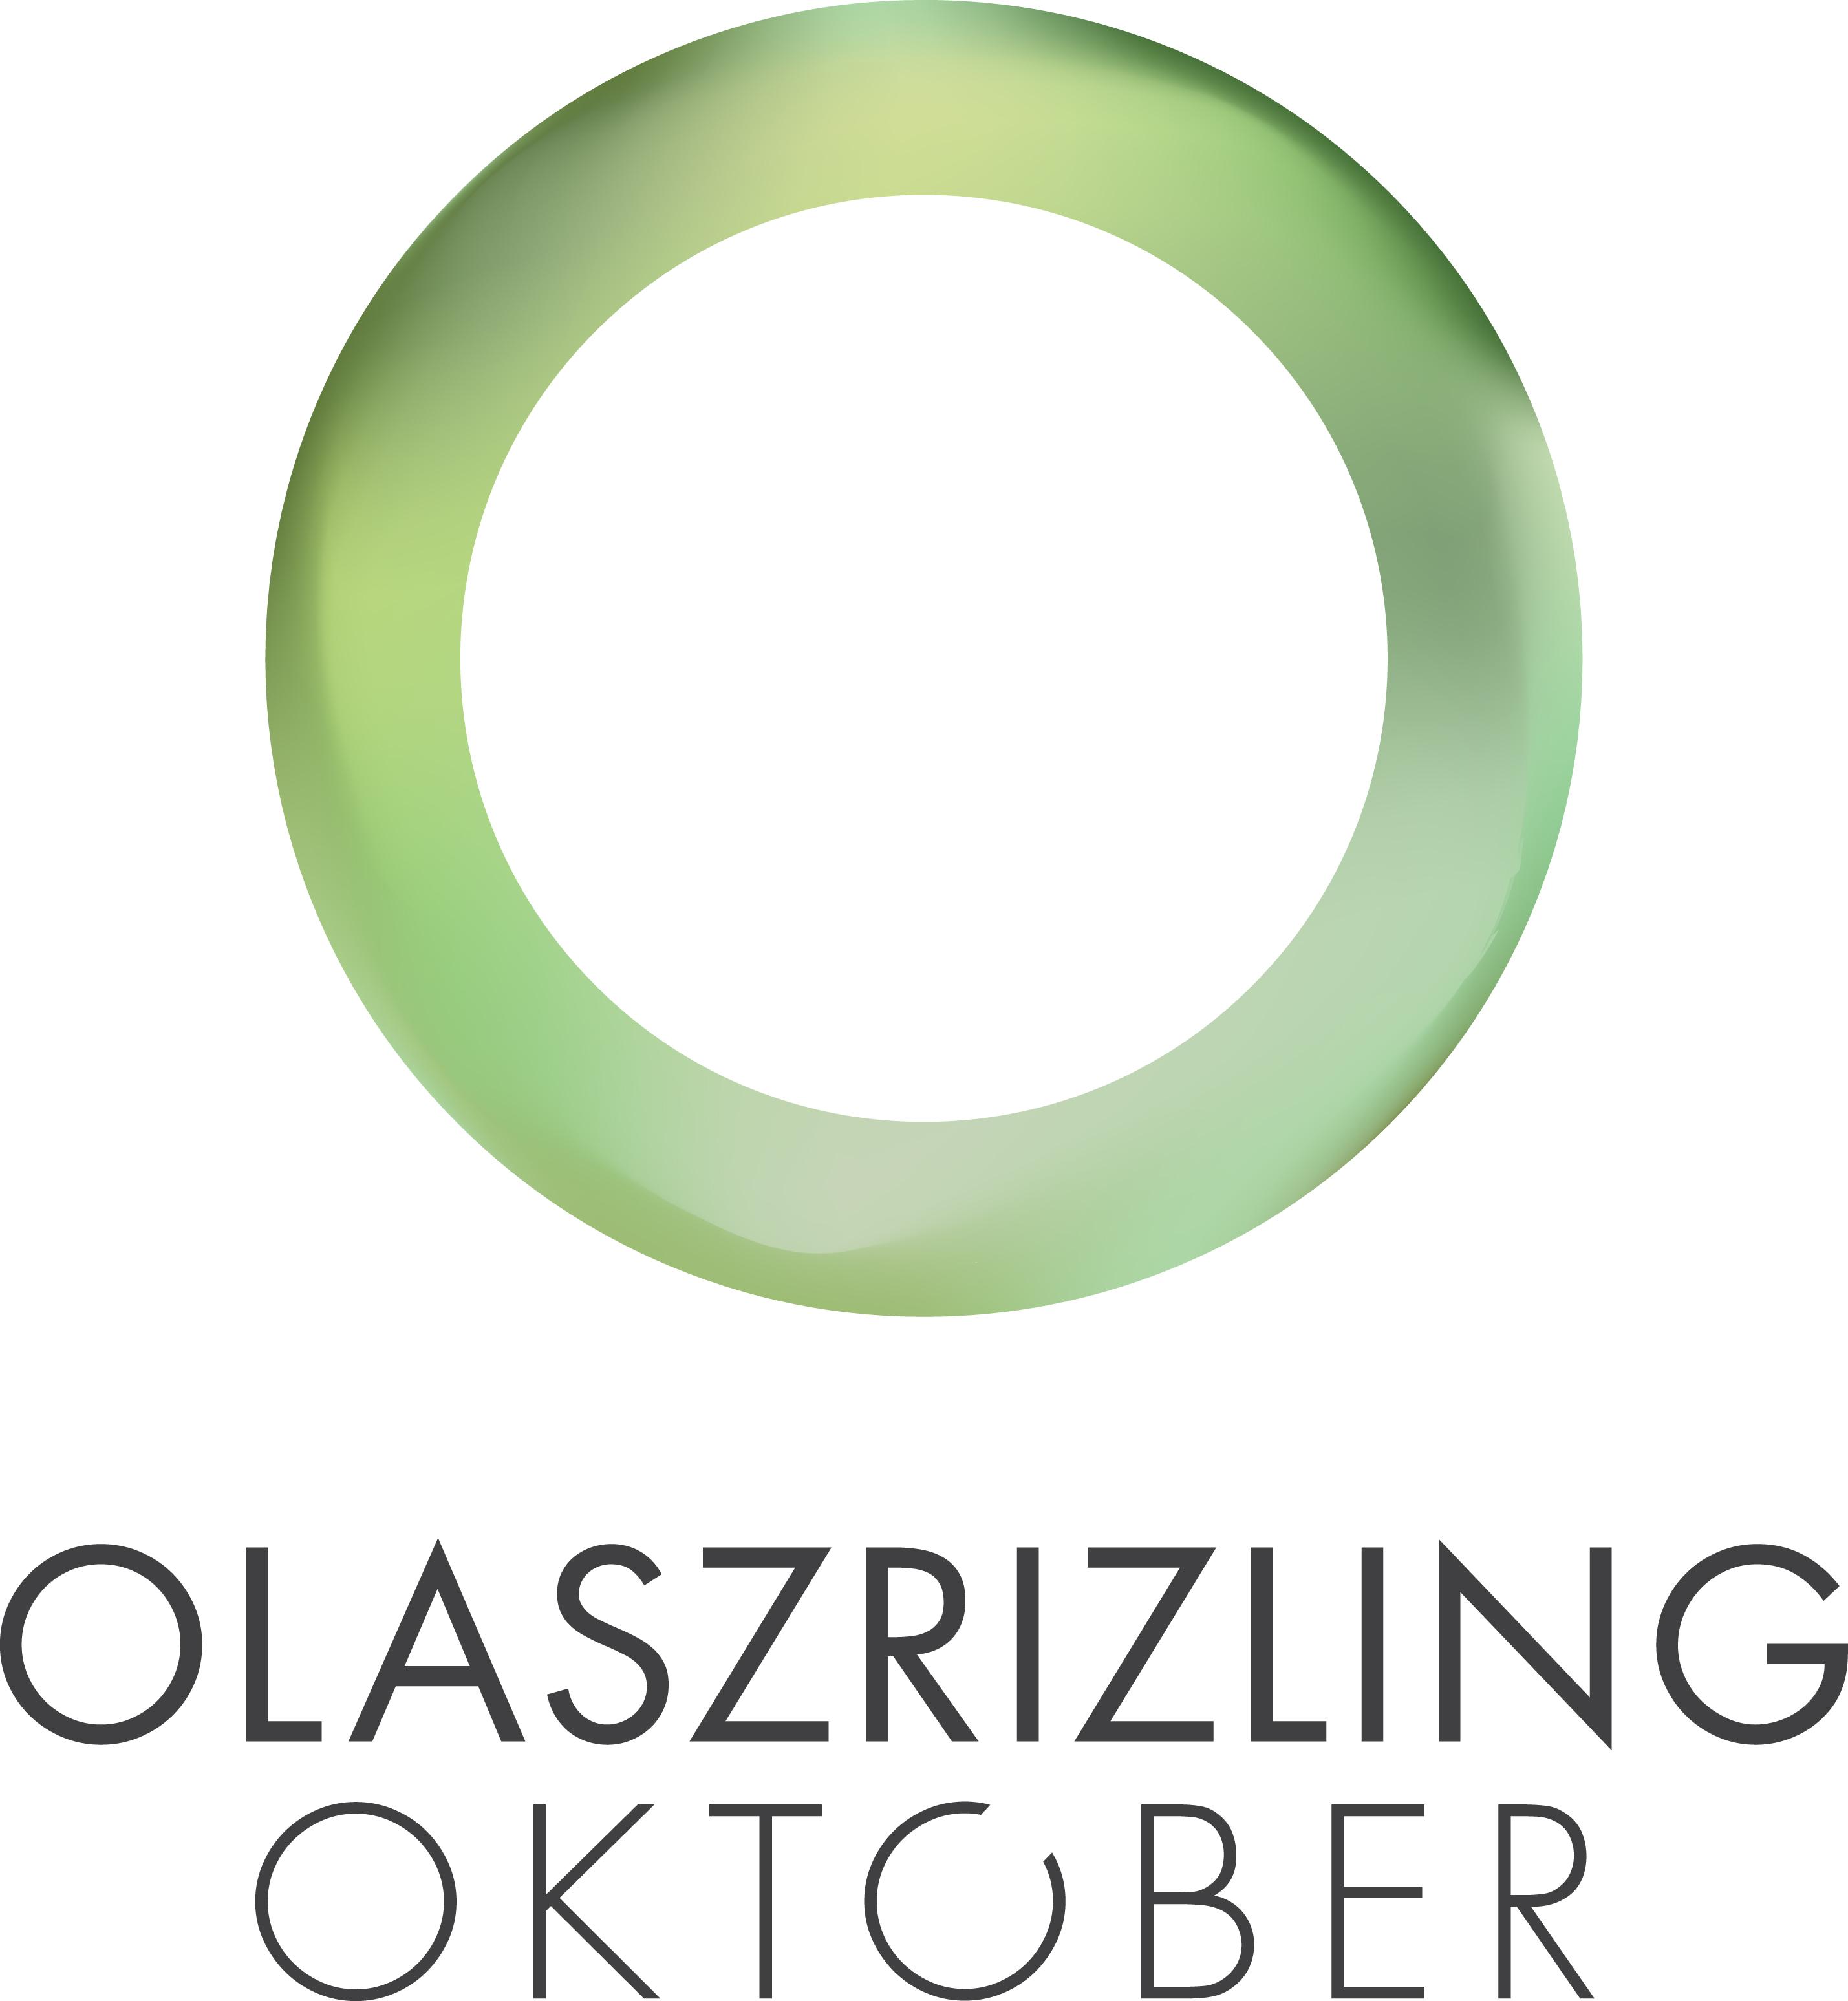 Invitation: Olaszrizling October First Time This Year